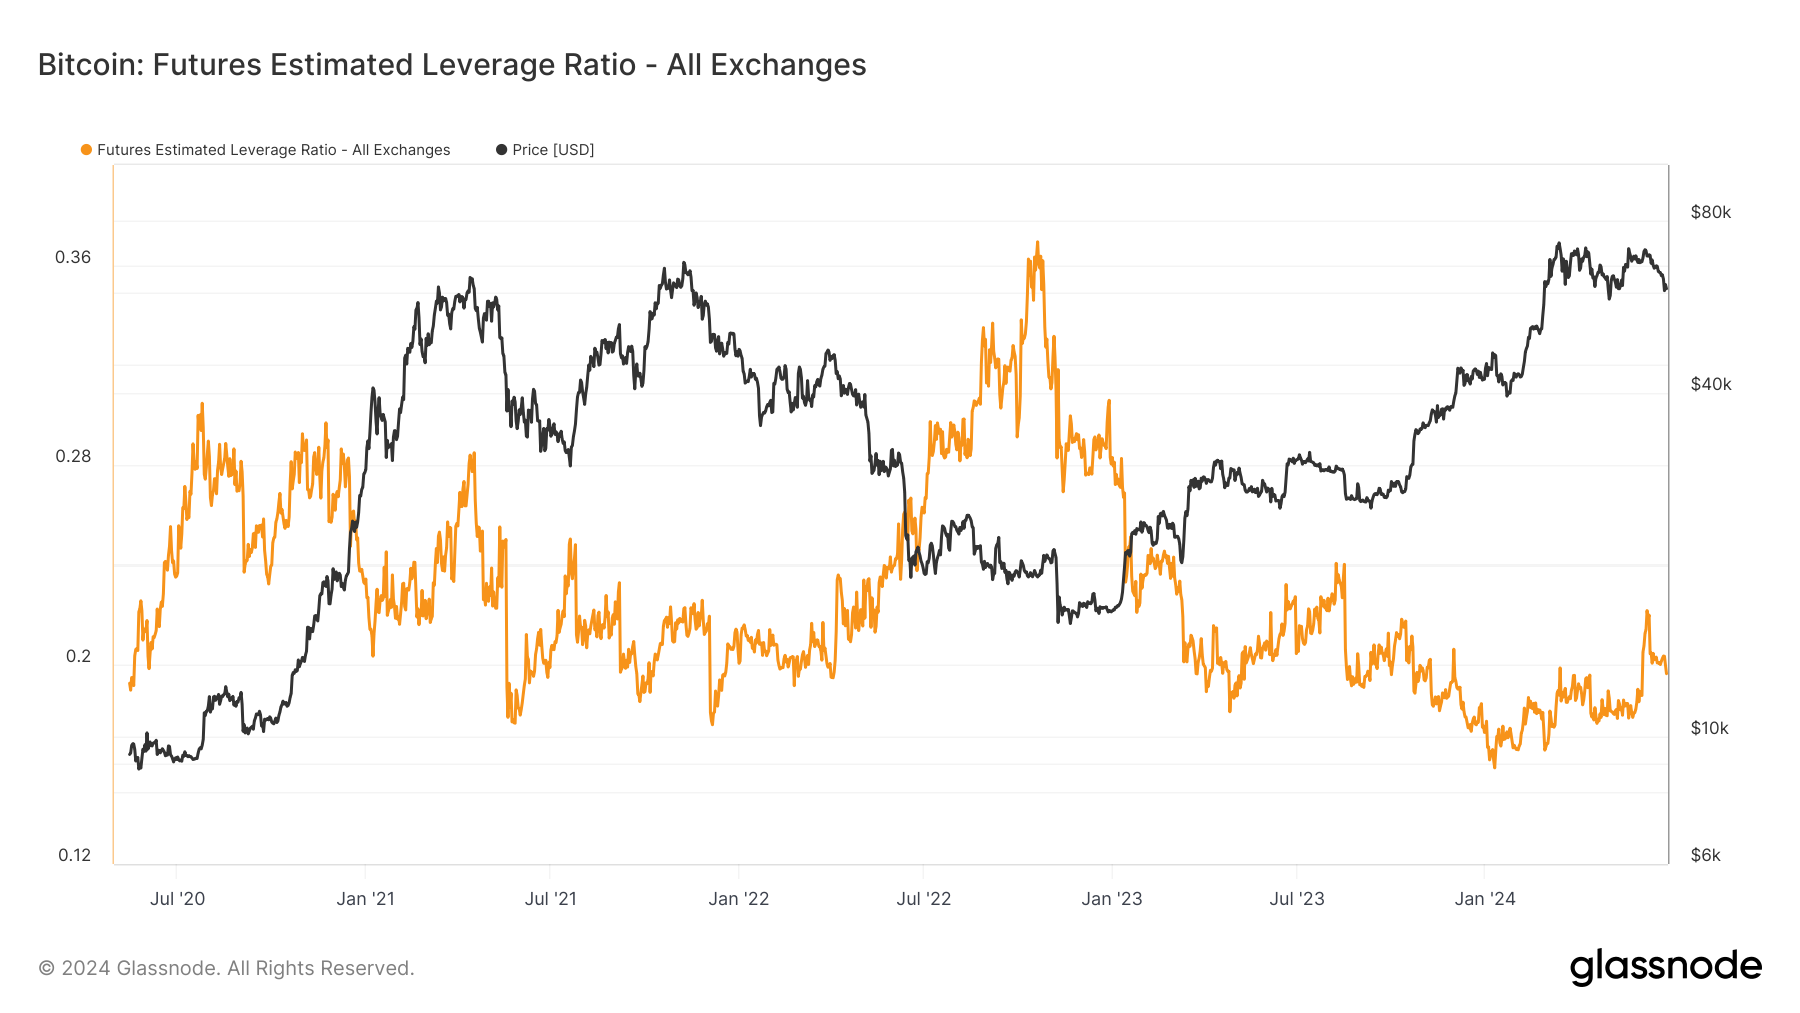 Bitcoin futures leverage ratio’s sharp June fluctuation hints at market deleverage phase